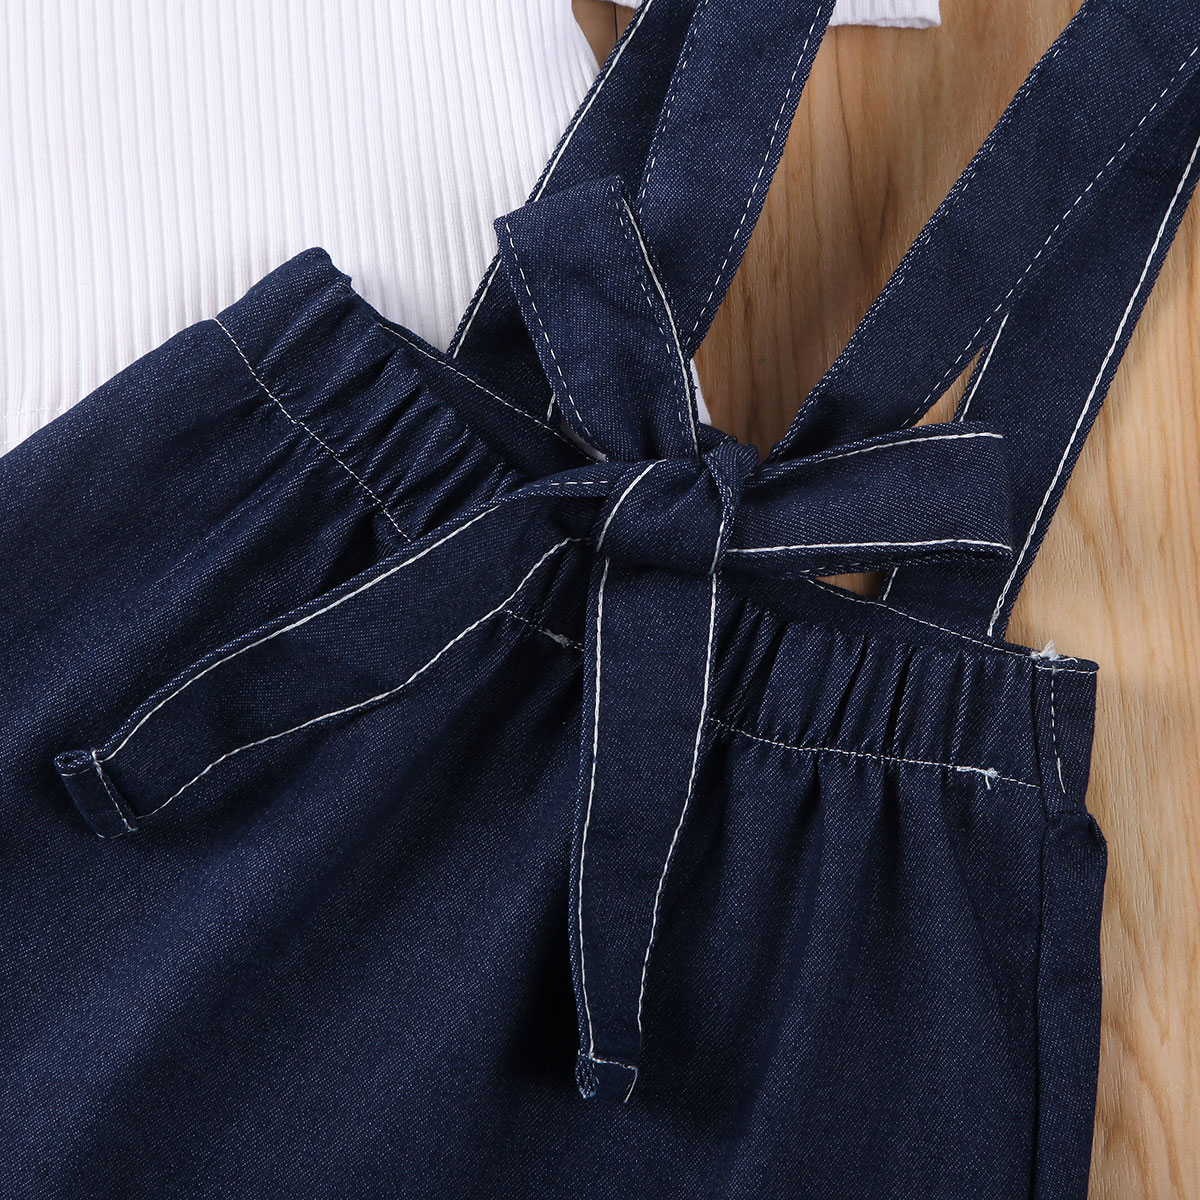 2PCS Toddler Kids Baby Girls Clothes Sets Bowknot Puff Sleeve T-Shirts Tops Denim Strap Dress Clothes